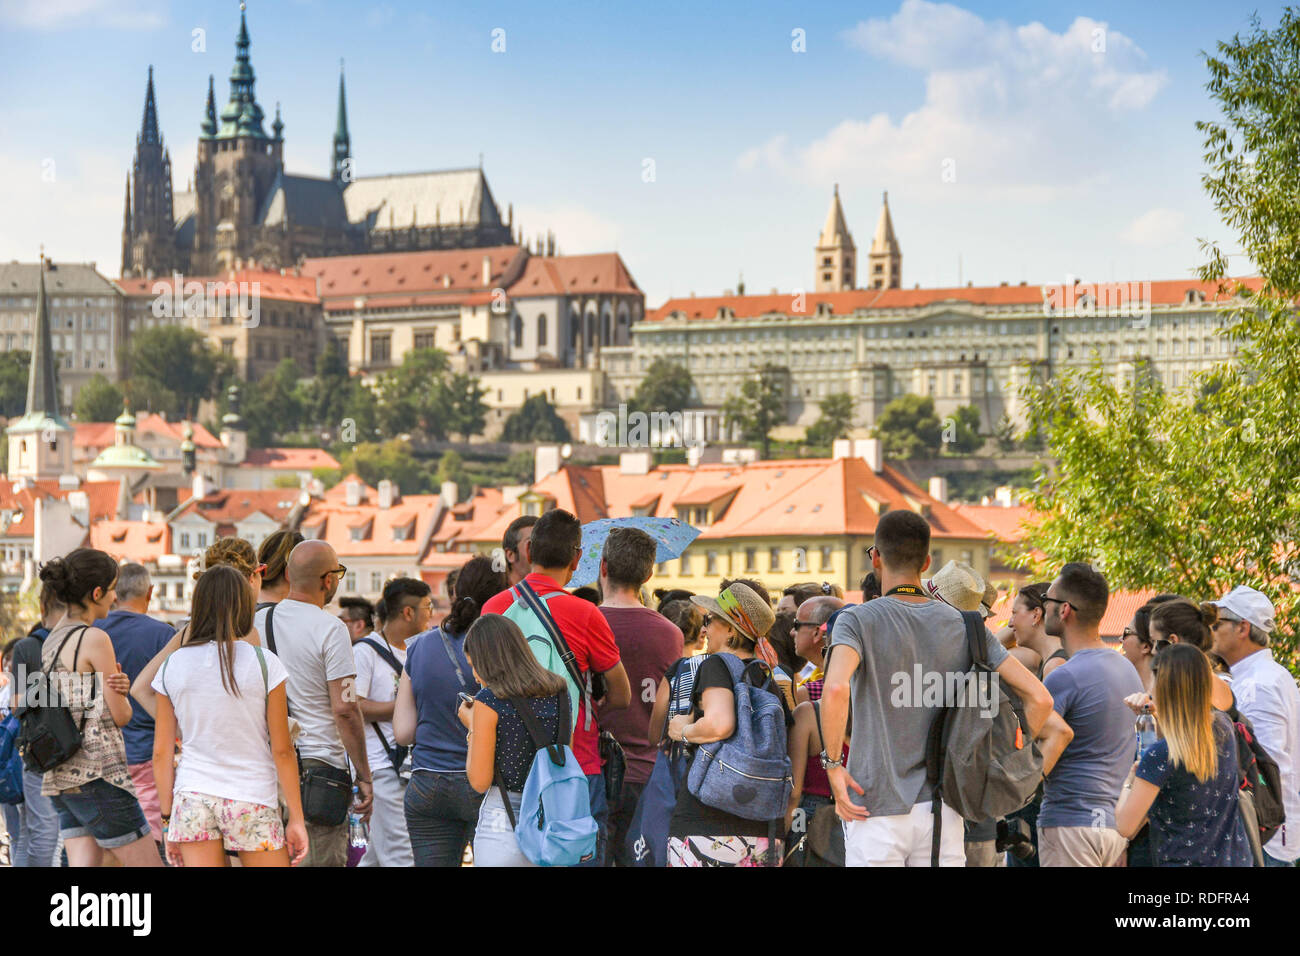 PRAGUE, CZECH REPUBLIC - AUGUST 2018:  Group of tourists in Prague with St Vitas Cathedral and Prague Castle in the background Stock Photo